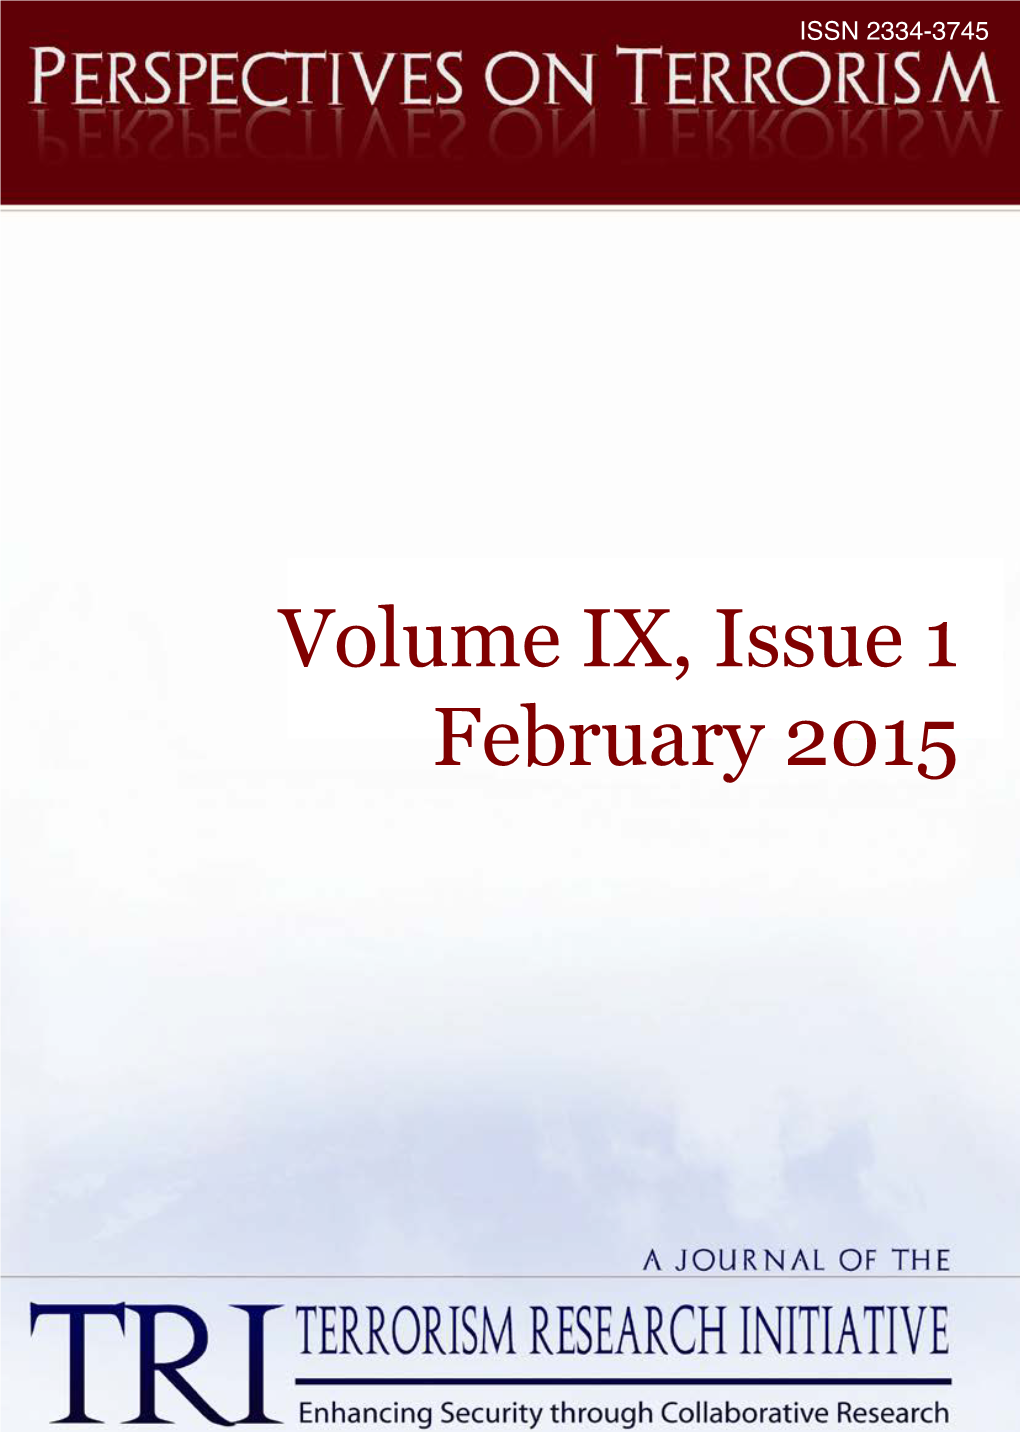 Volume IX, Issue 1 February 2015 PERSPECTIVES on TERRORISM Volume 9, Issue 1